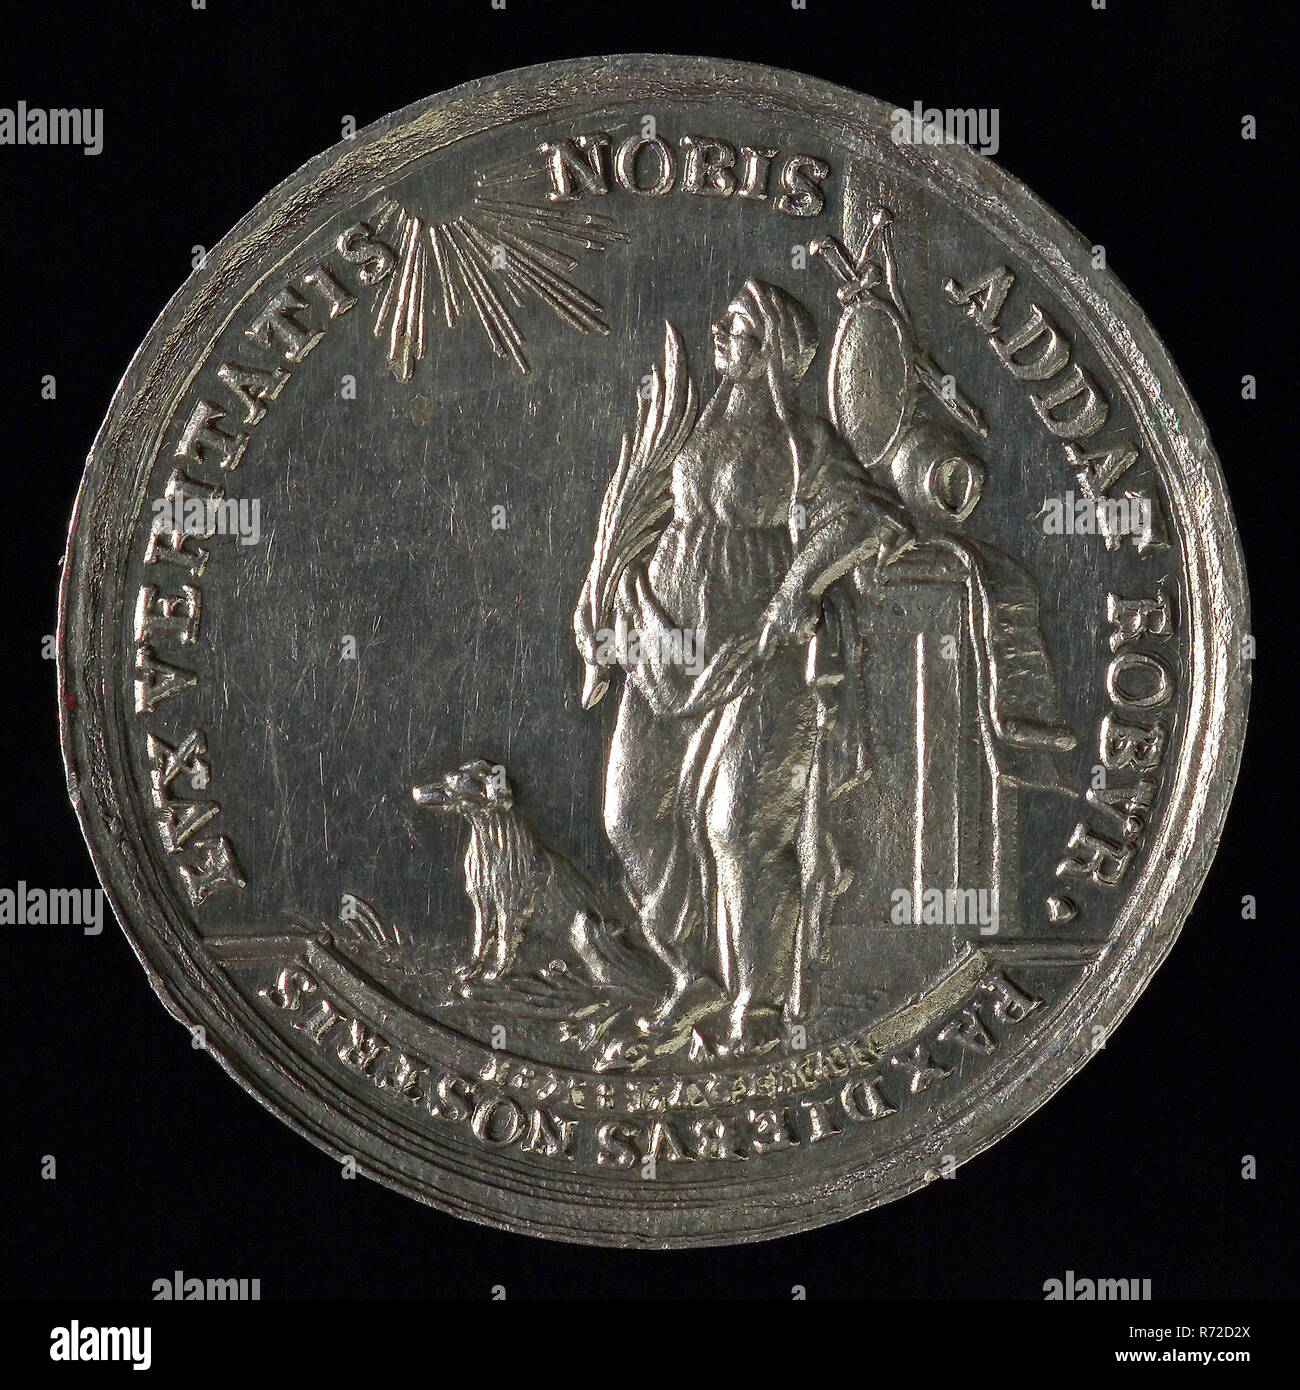 J.M. Lageman, Medal to commemorate storms and floods on 20 and 21 November 1776, penning footage silver, beach scene with shattered ships in the foreground washed up merchandise, omschrift TER MEMORIES OF THE STORM AND WATER FLOOR on the side wall OP DEN 20 & 21 NOV 1776 Stock Photo